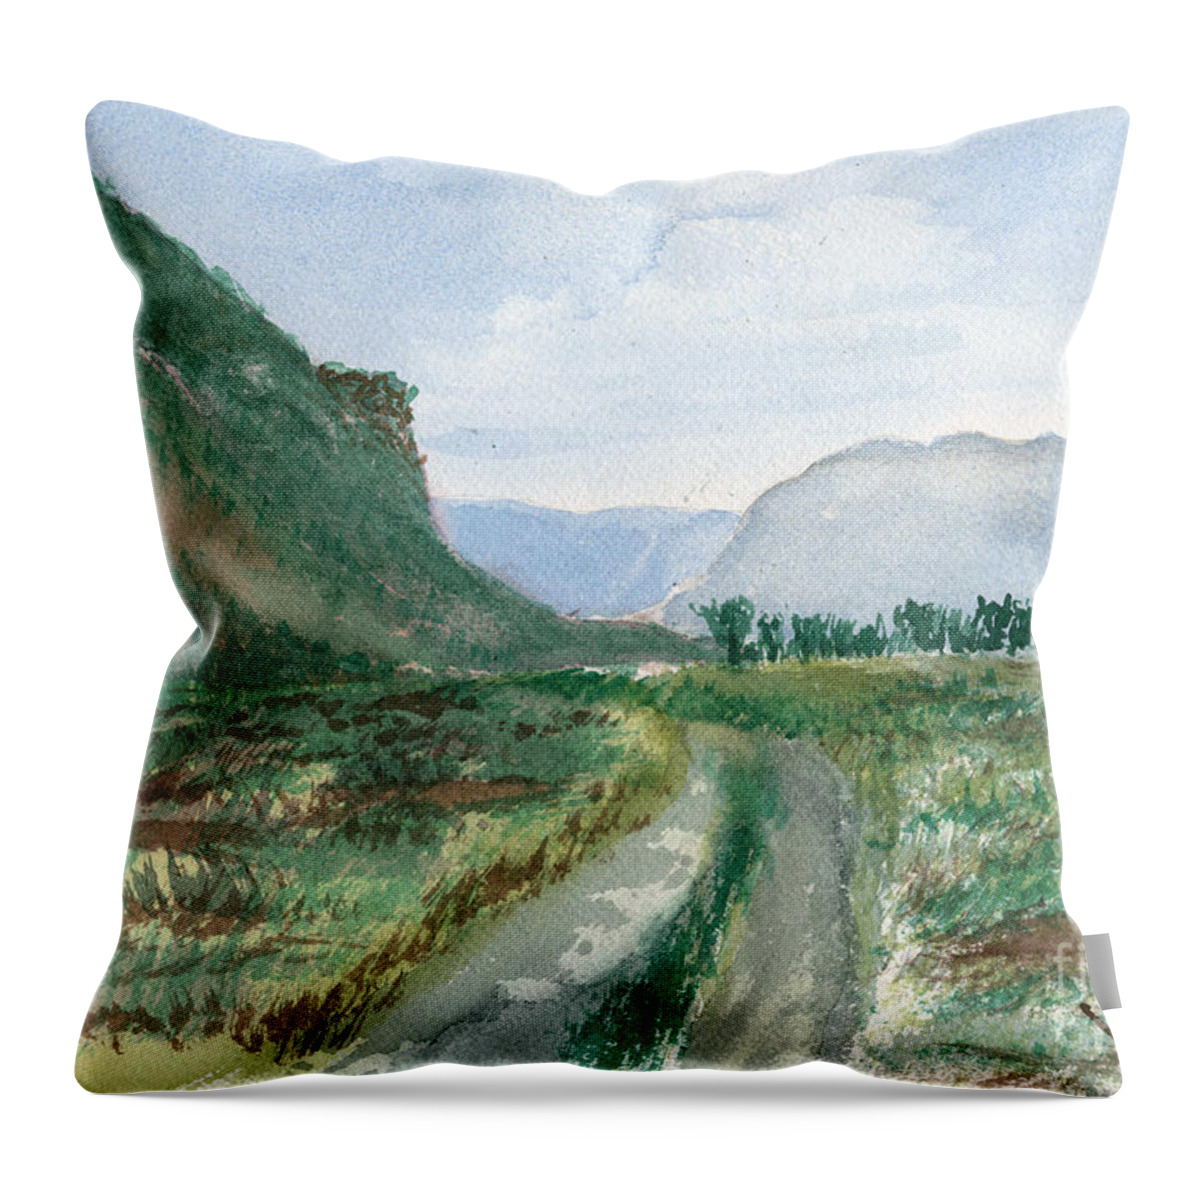 Kootenai Throw Pillow featuring the painting Trail To Canada by Victor Vosen